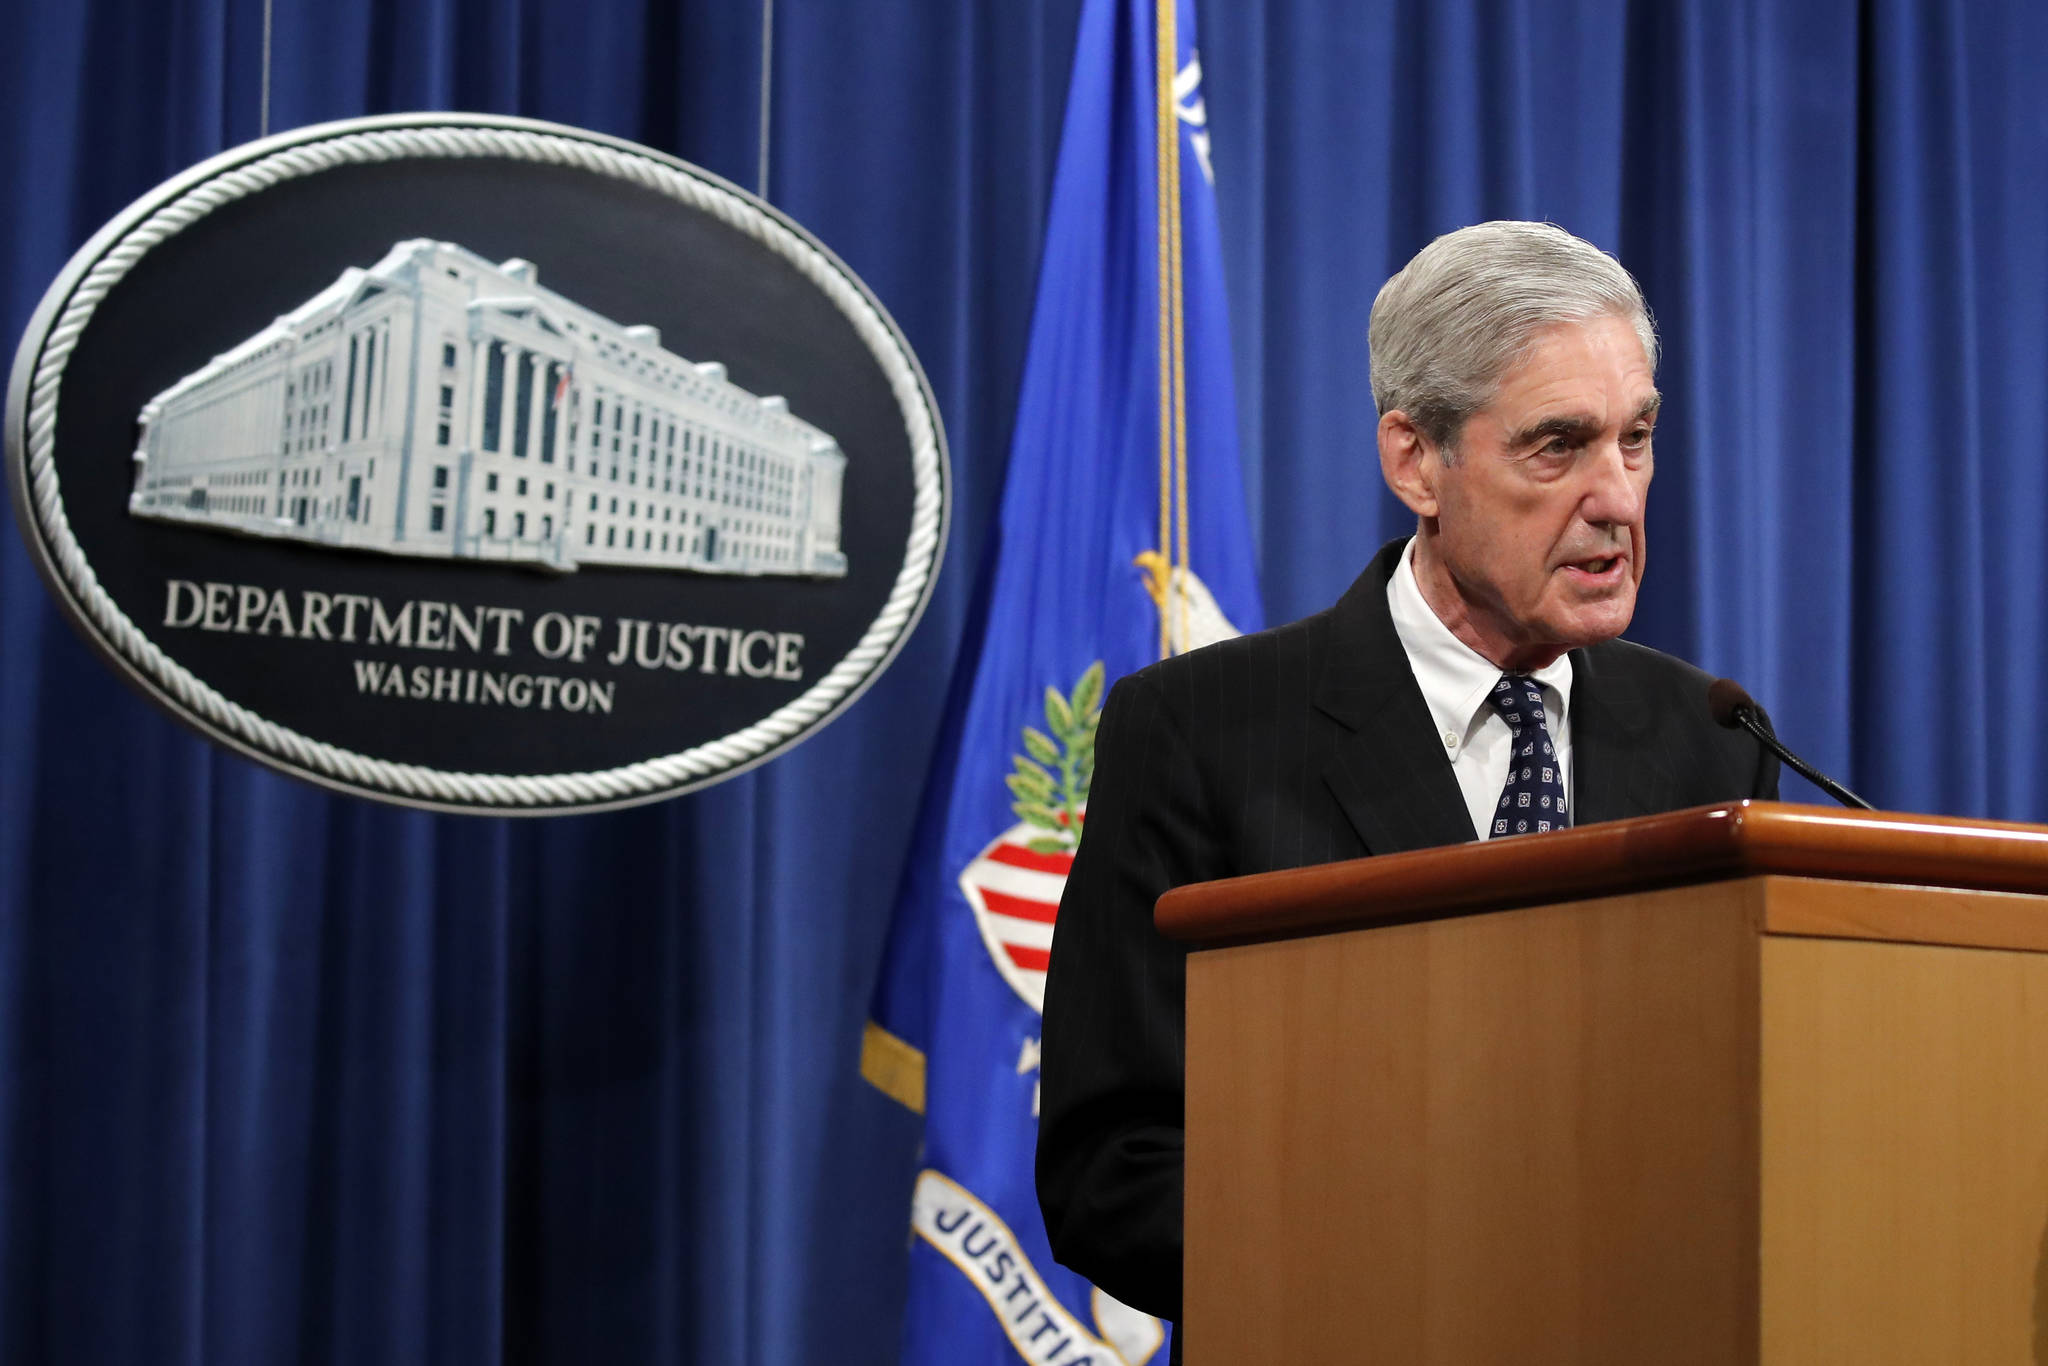 Special counsel Robert Mueller speaks at the Department of Justice Wednesday, May 29 in Washington, about the Russia investigation. (AP Photo | Carolyn Kaster)